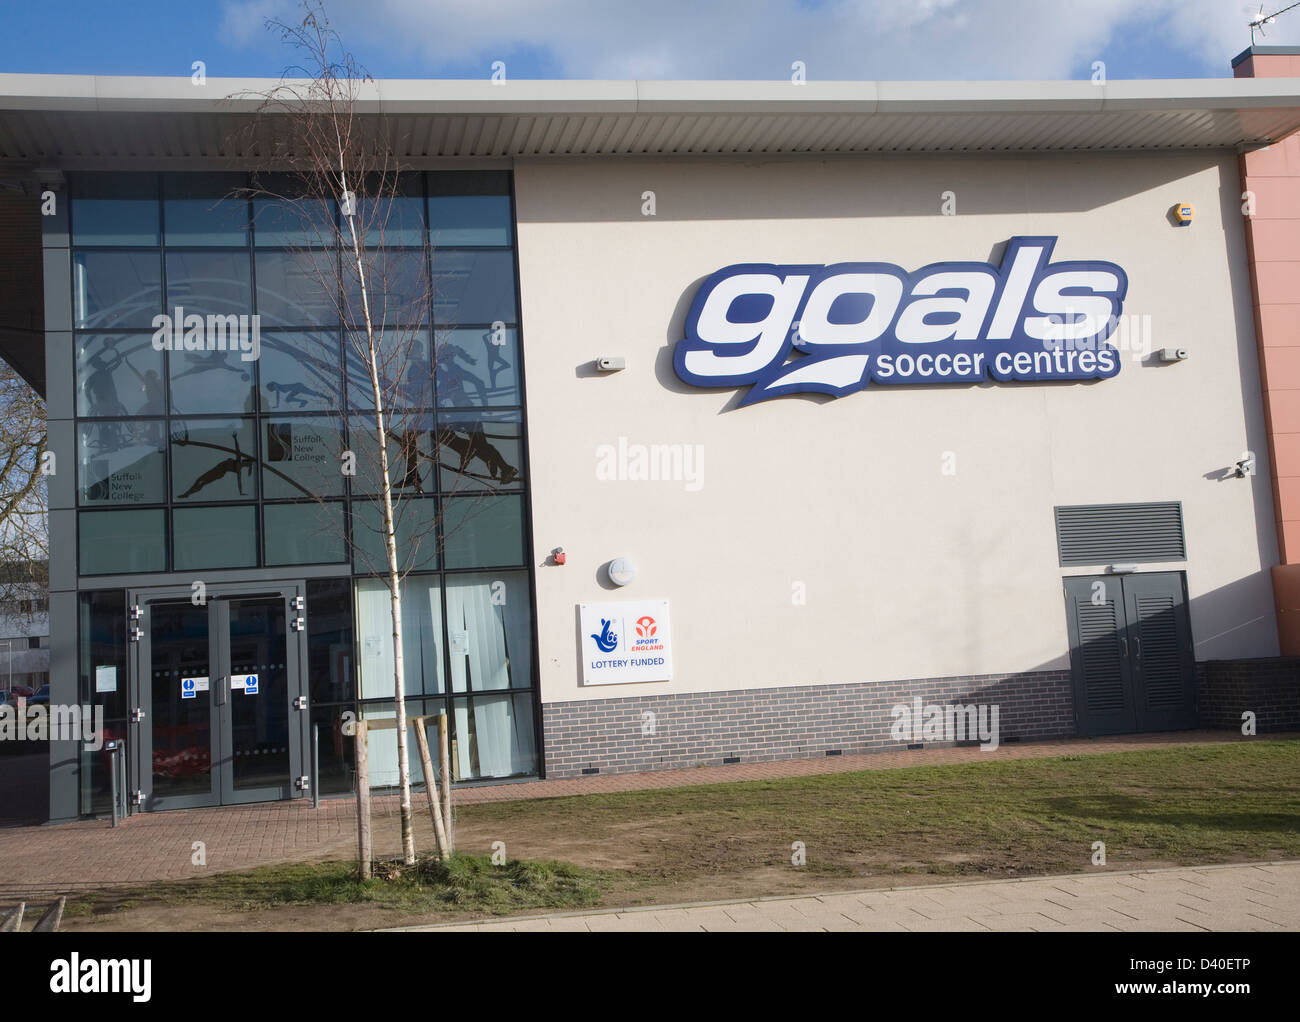 Buts Soccer Centre des sports d'Ipswich, Suffolk, Angleterre Banque D'Images